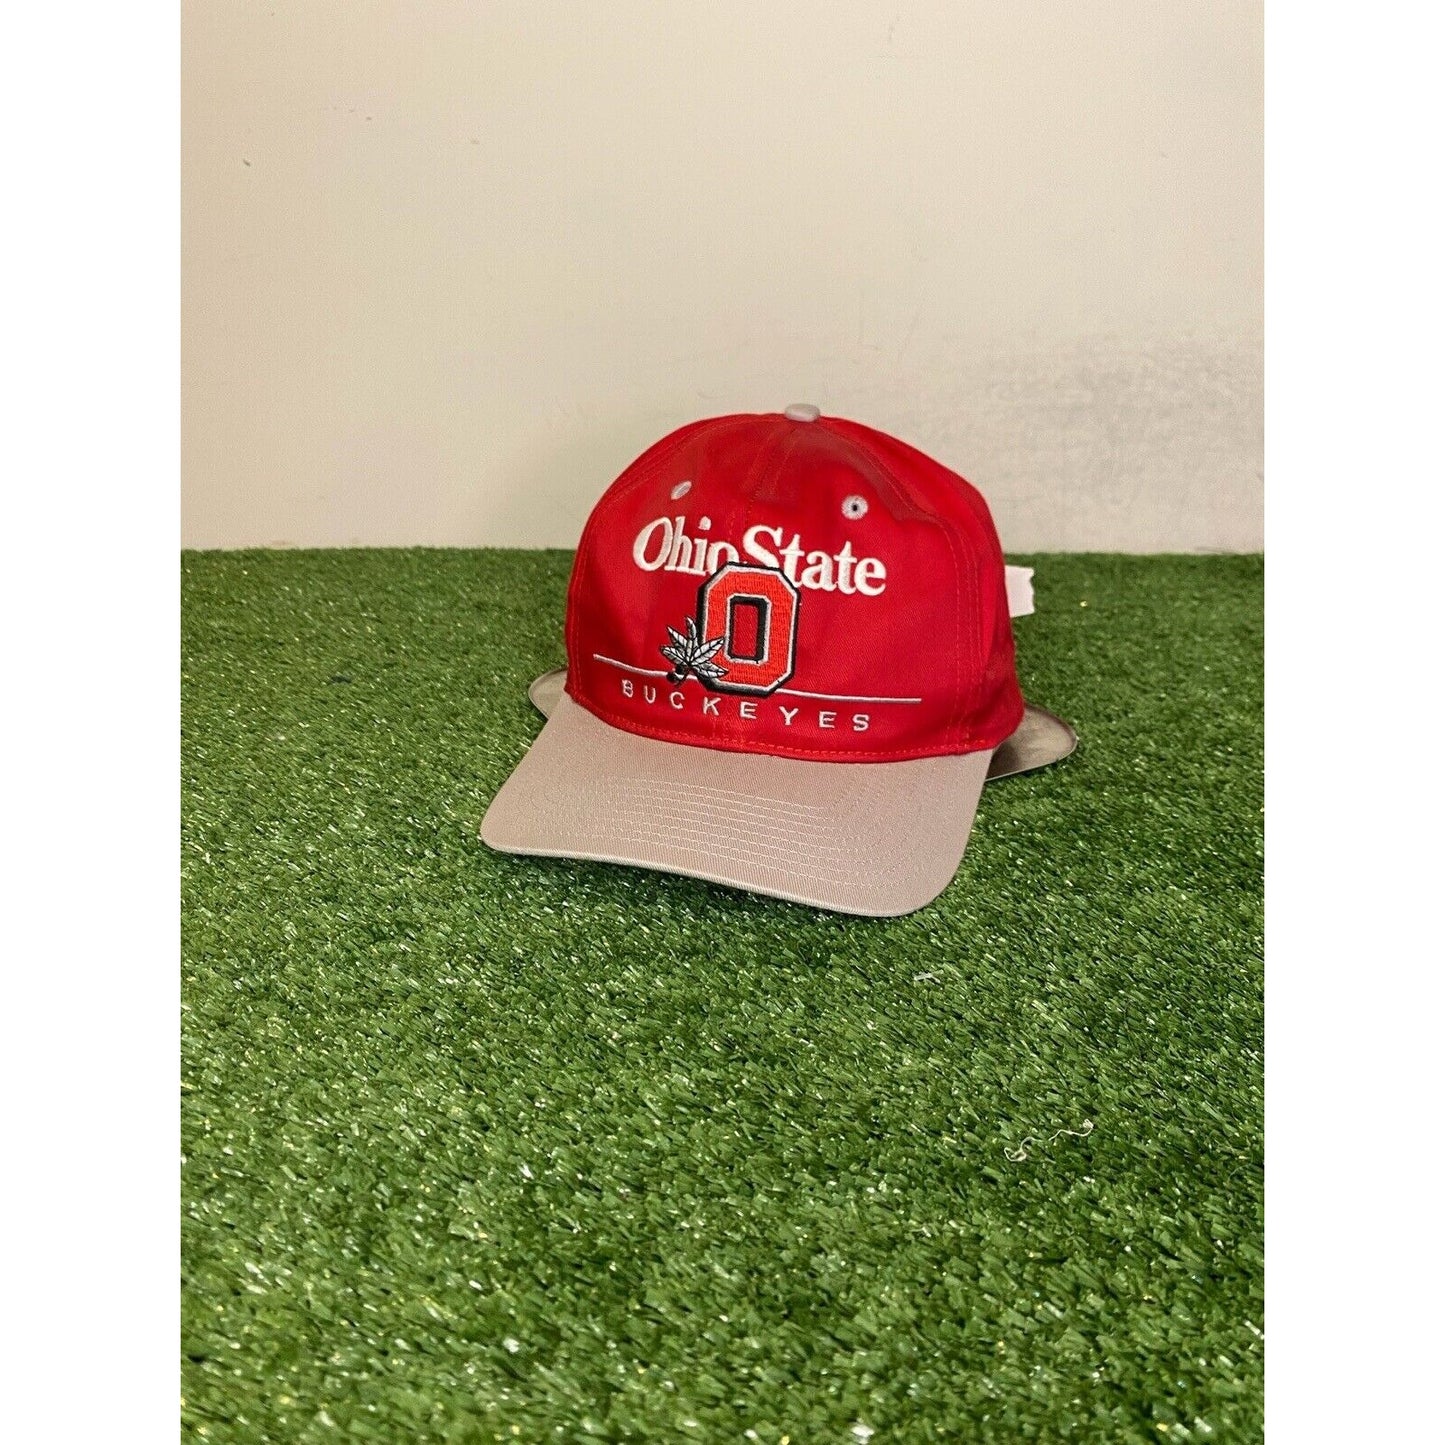 Vintage Ohio State Buckeyes hat cap snap back mens red gray Twins Enterprise 90s